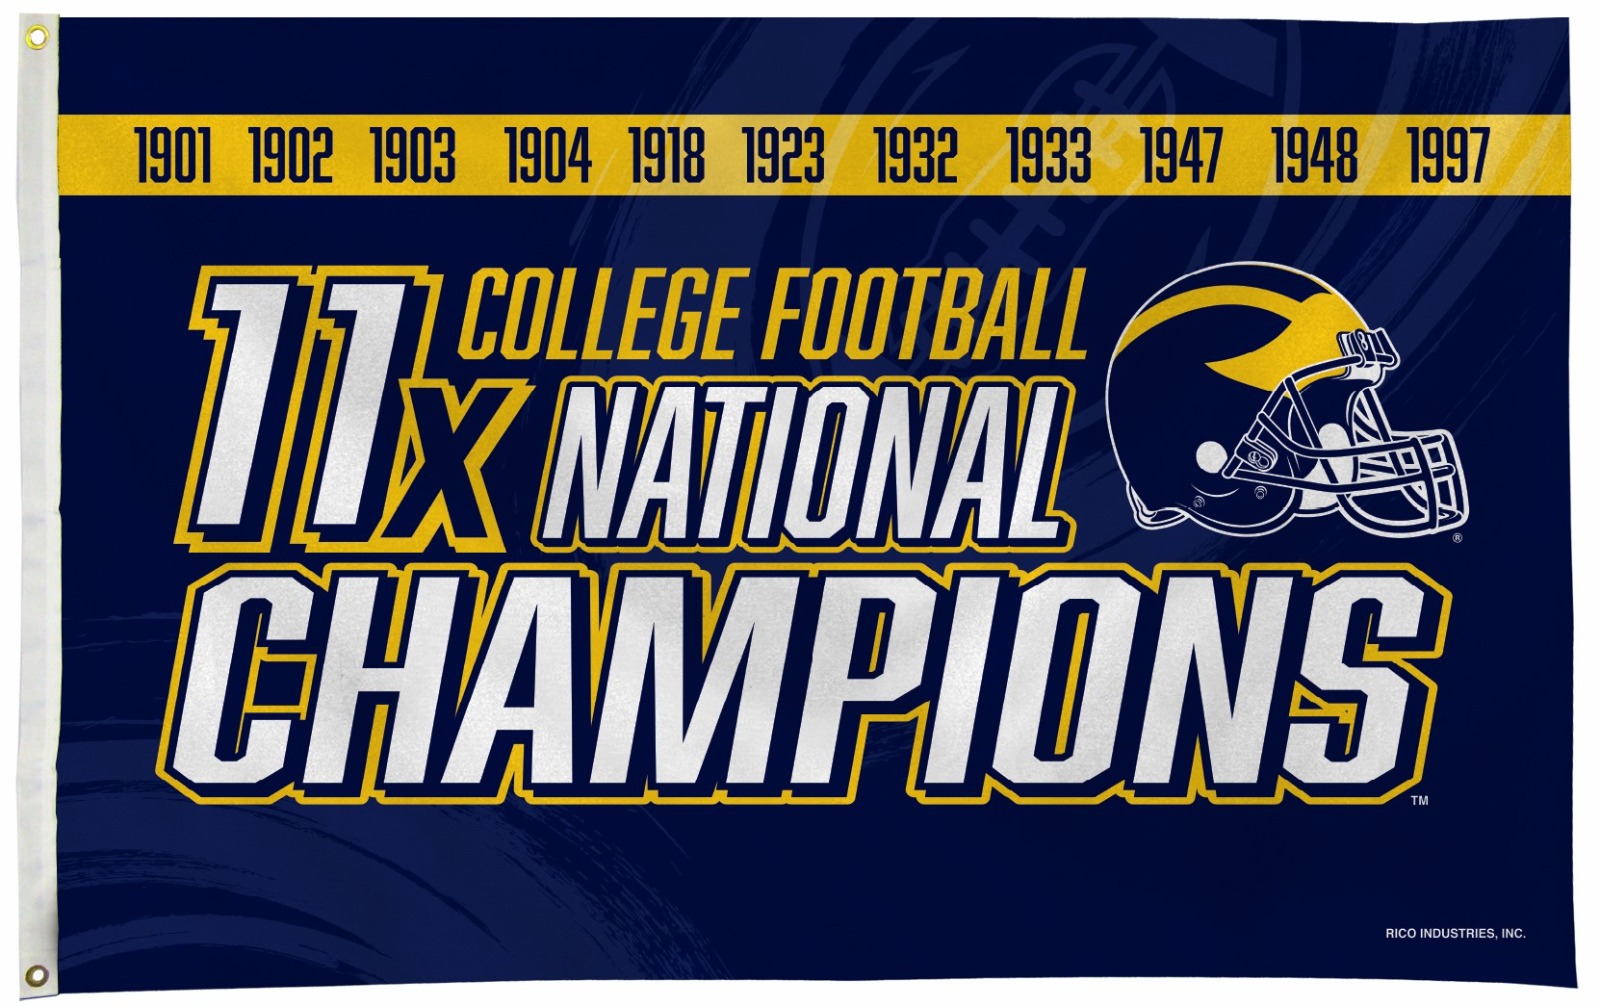 Michigan Wolverines 3x5 Flag Banner 11X Time National Champions